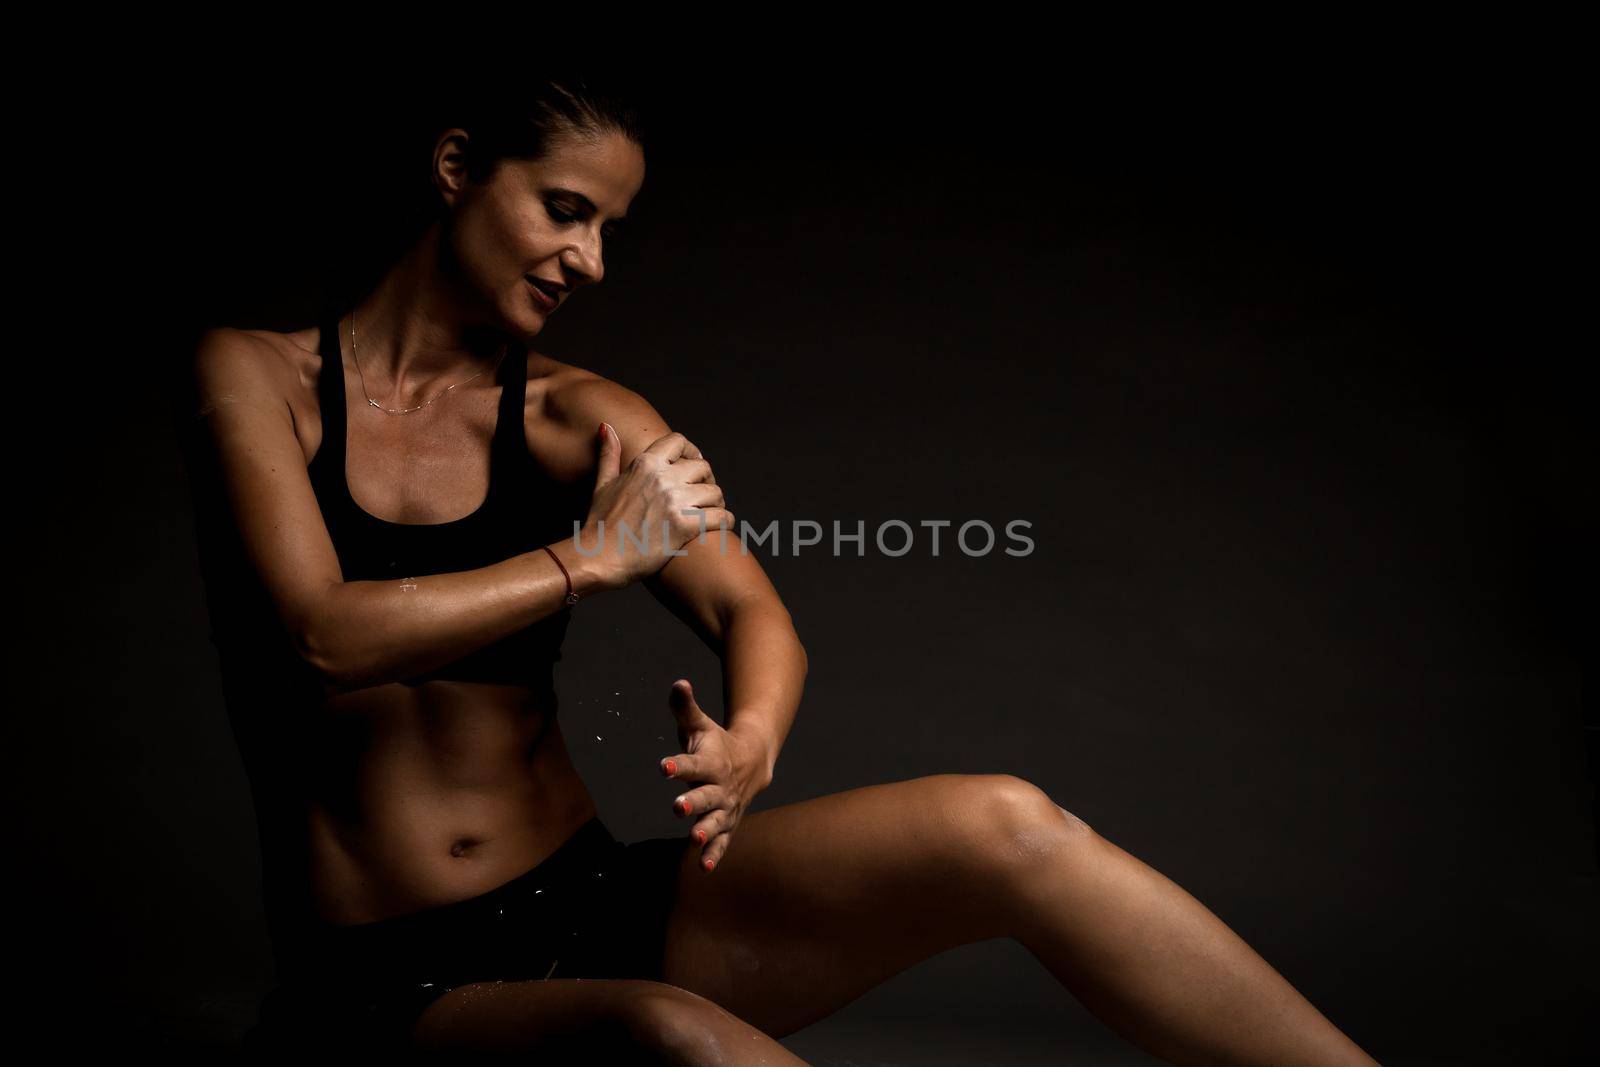 Sexy fit girl in sportswear on the ground. Magnesium powder prints of hands on her body.